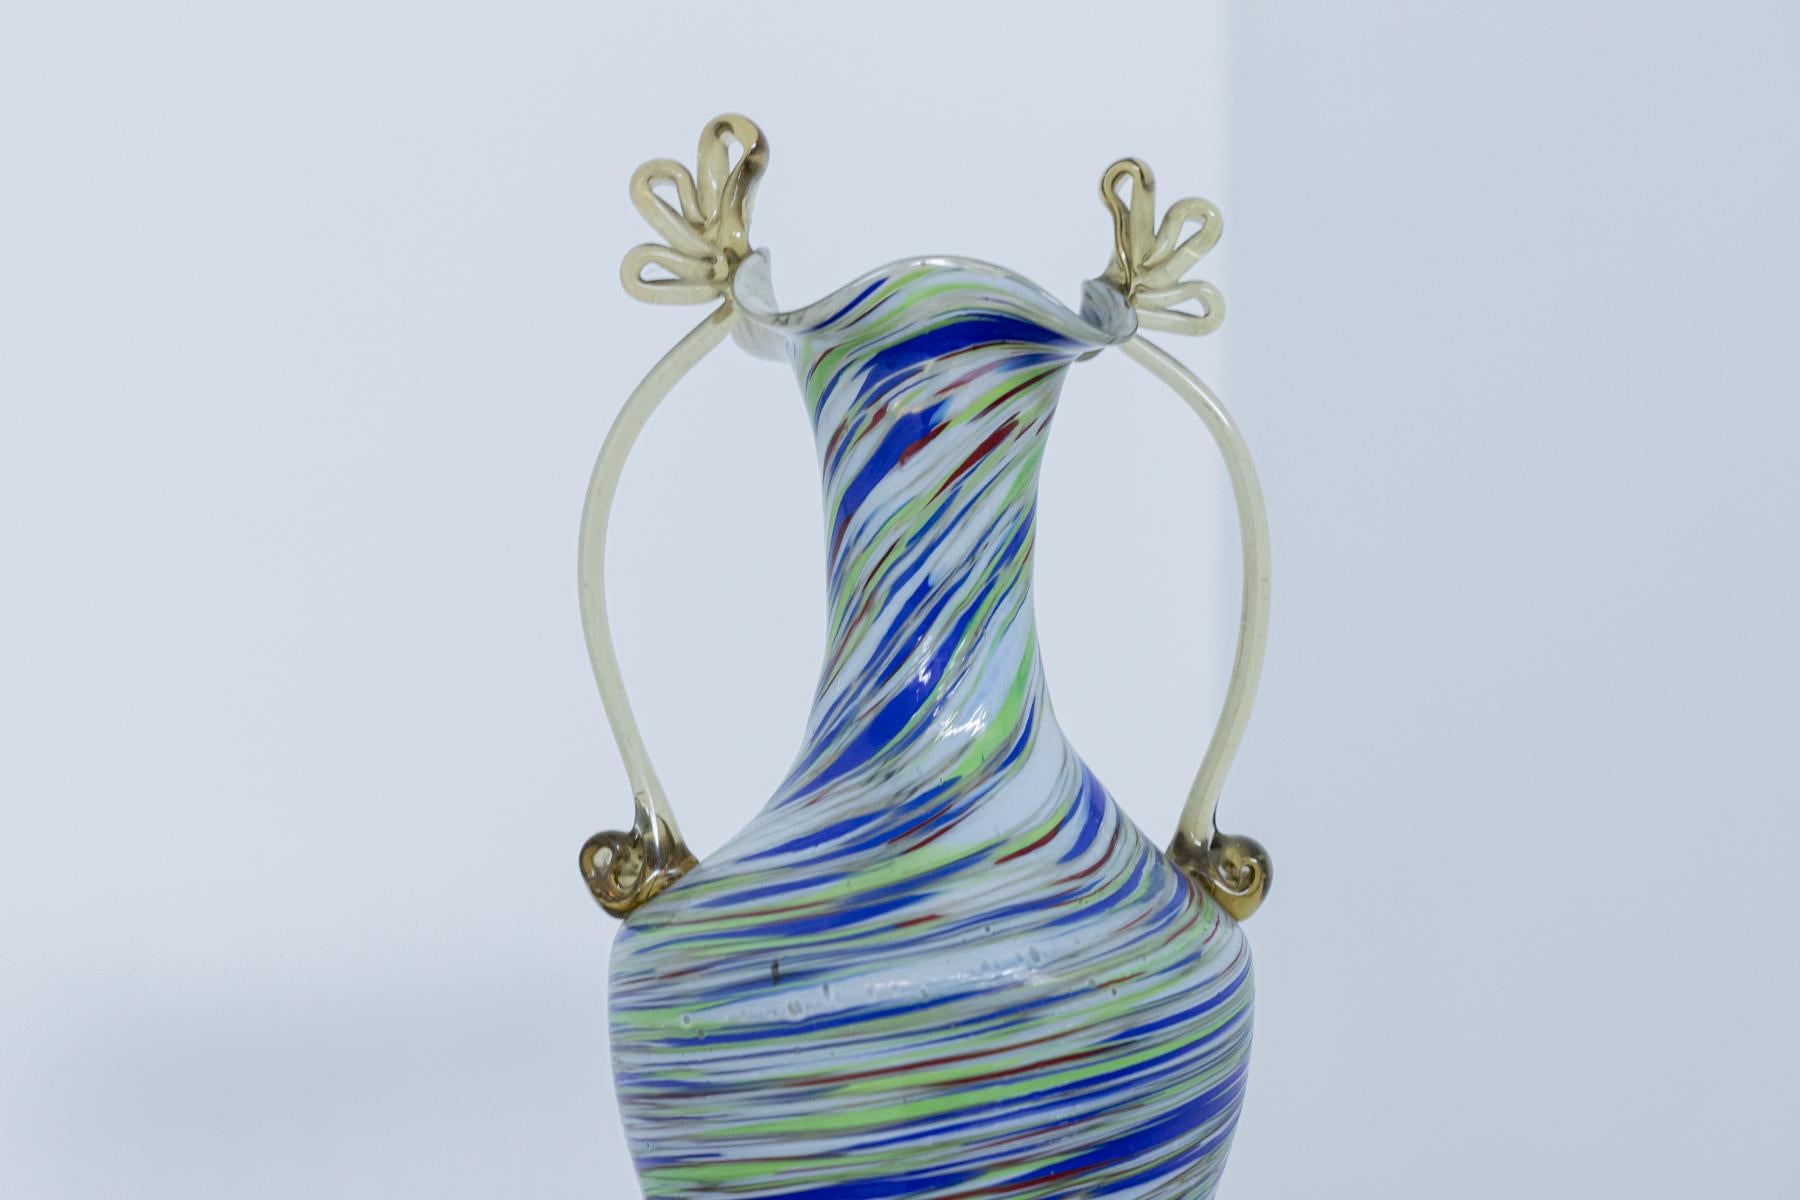 Fratelli Toso Vintage Colored Murano Glass Vase, 1920s For Sale 3